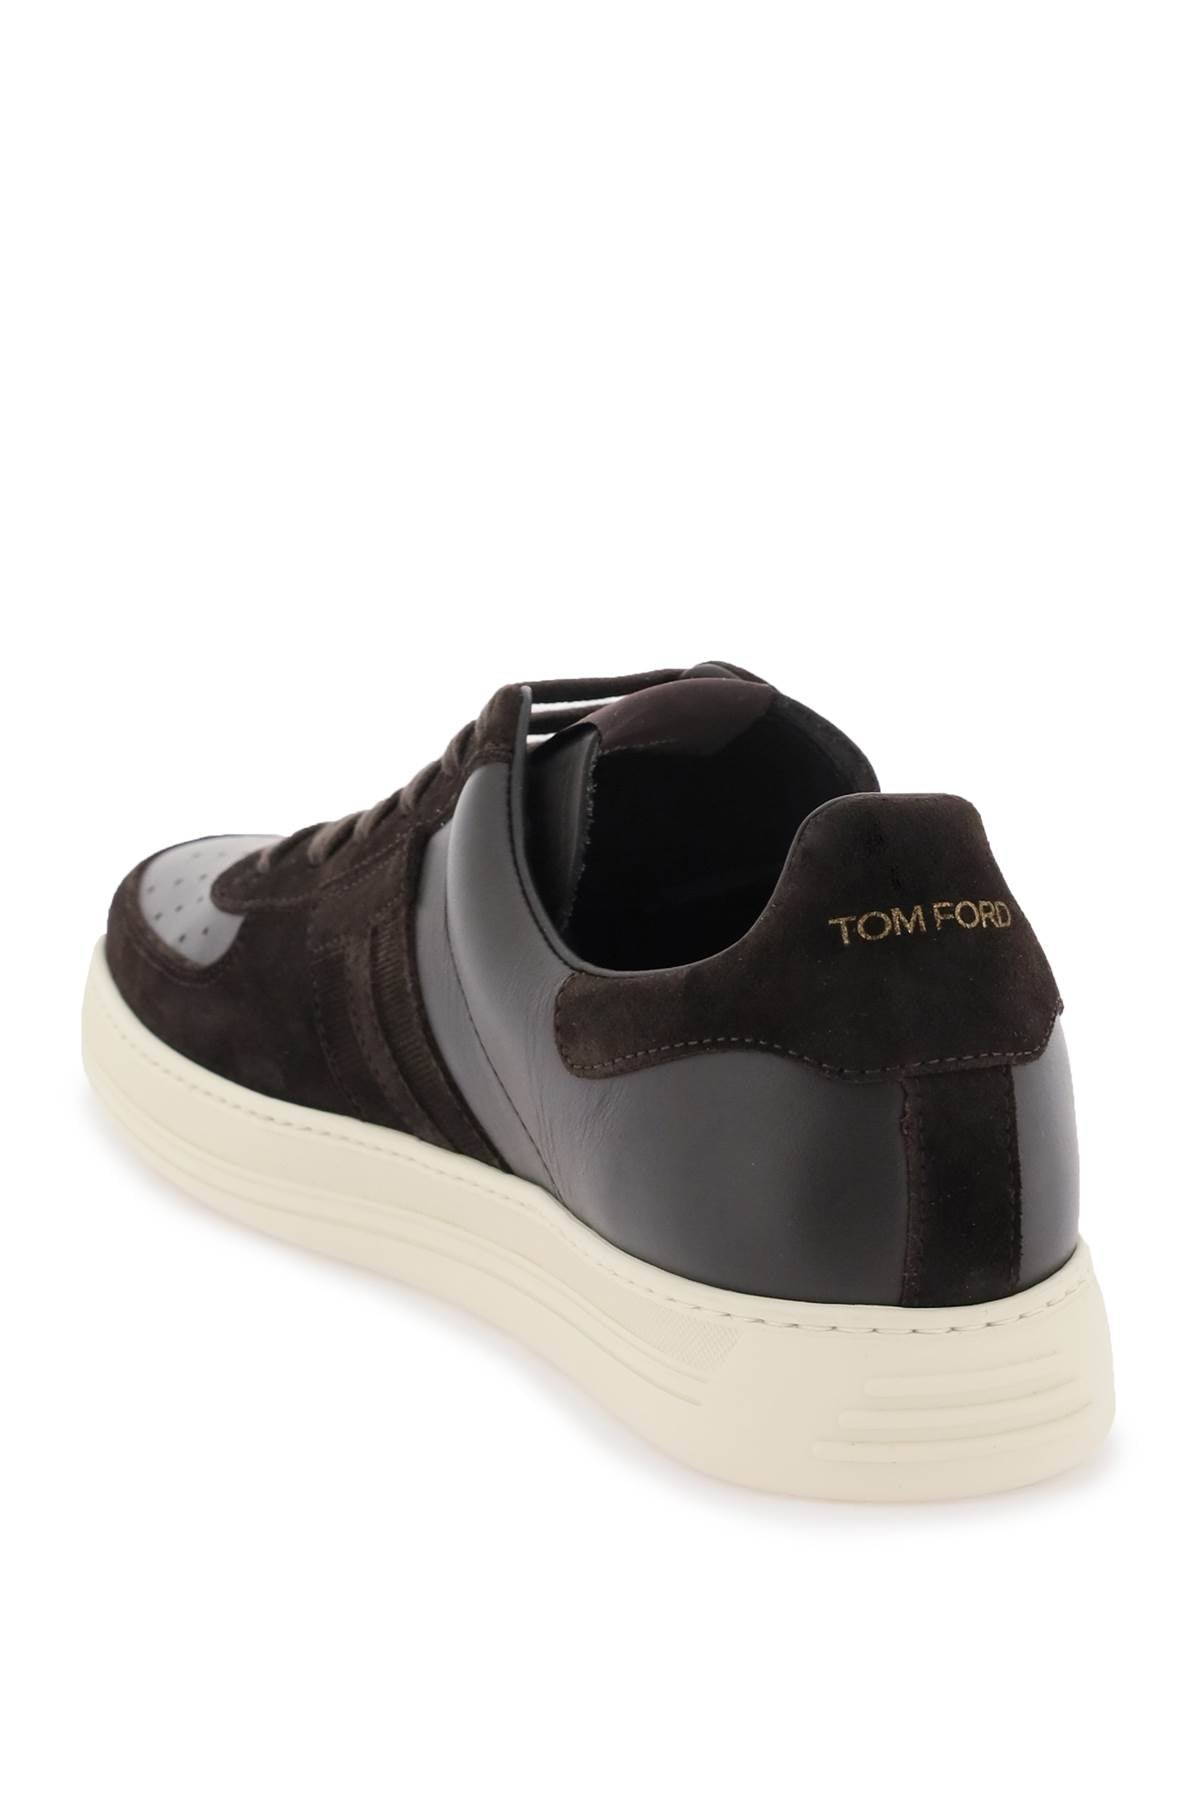 Tom ford suede and leather 'radcliffe' sneakers-2